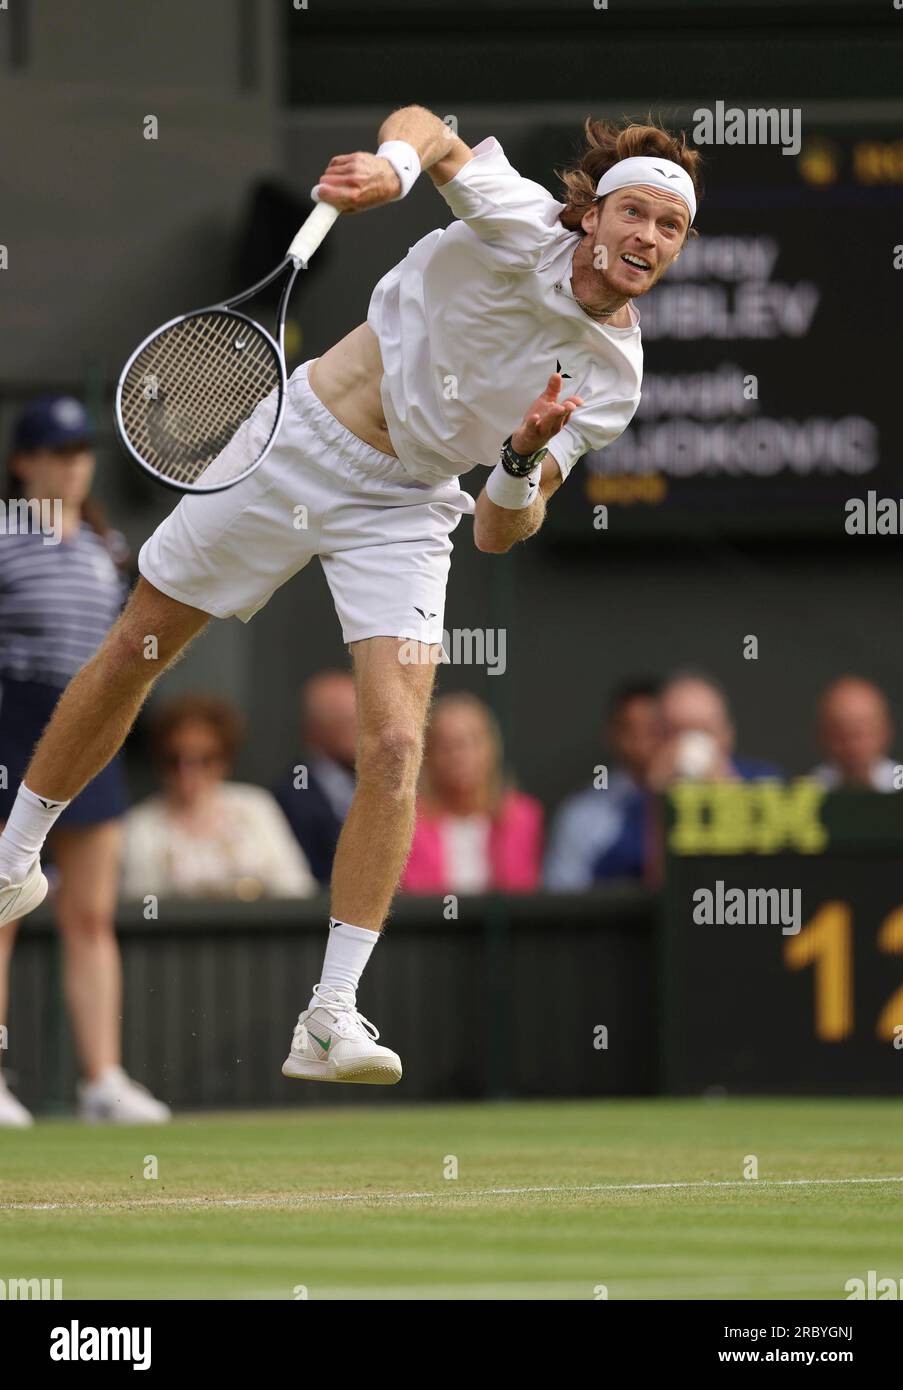 Andrey Rublev of Russia hits a ball during the Gentlemens Singles Quarter-finals match against Novak Djokovic of Serbia in the Championships, Wimbledon at All England Lawn Tennis and Croquet Club in London,